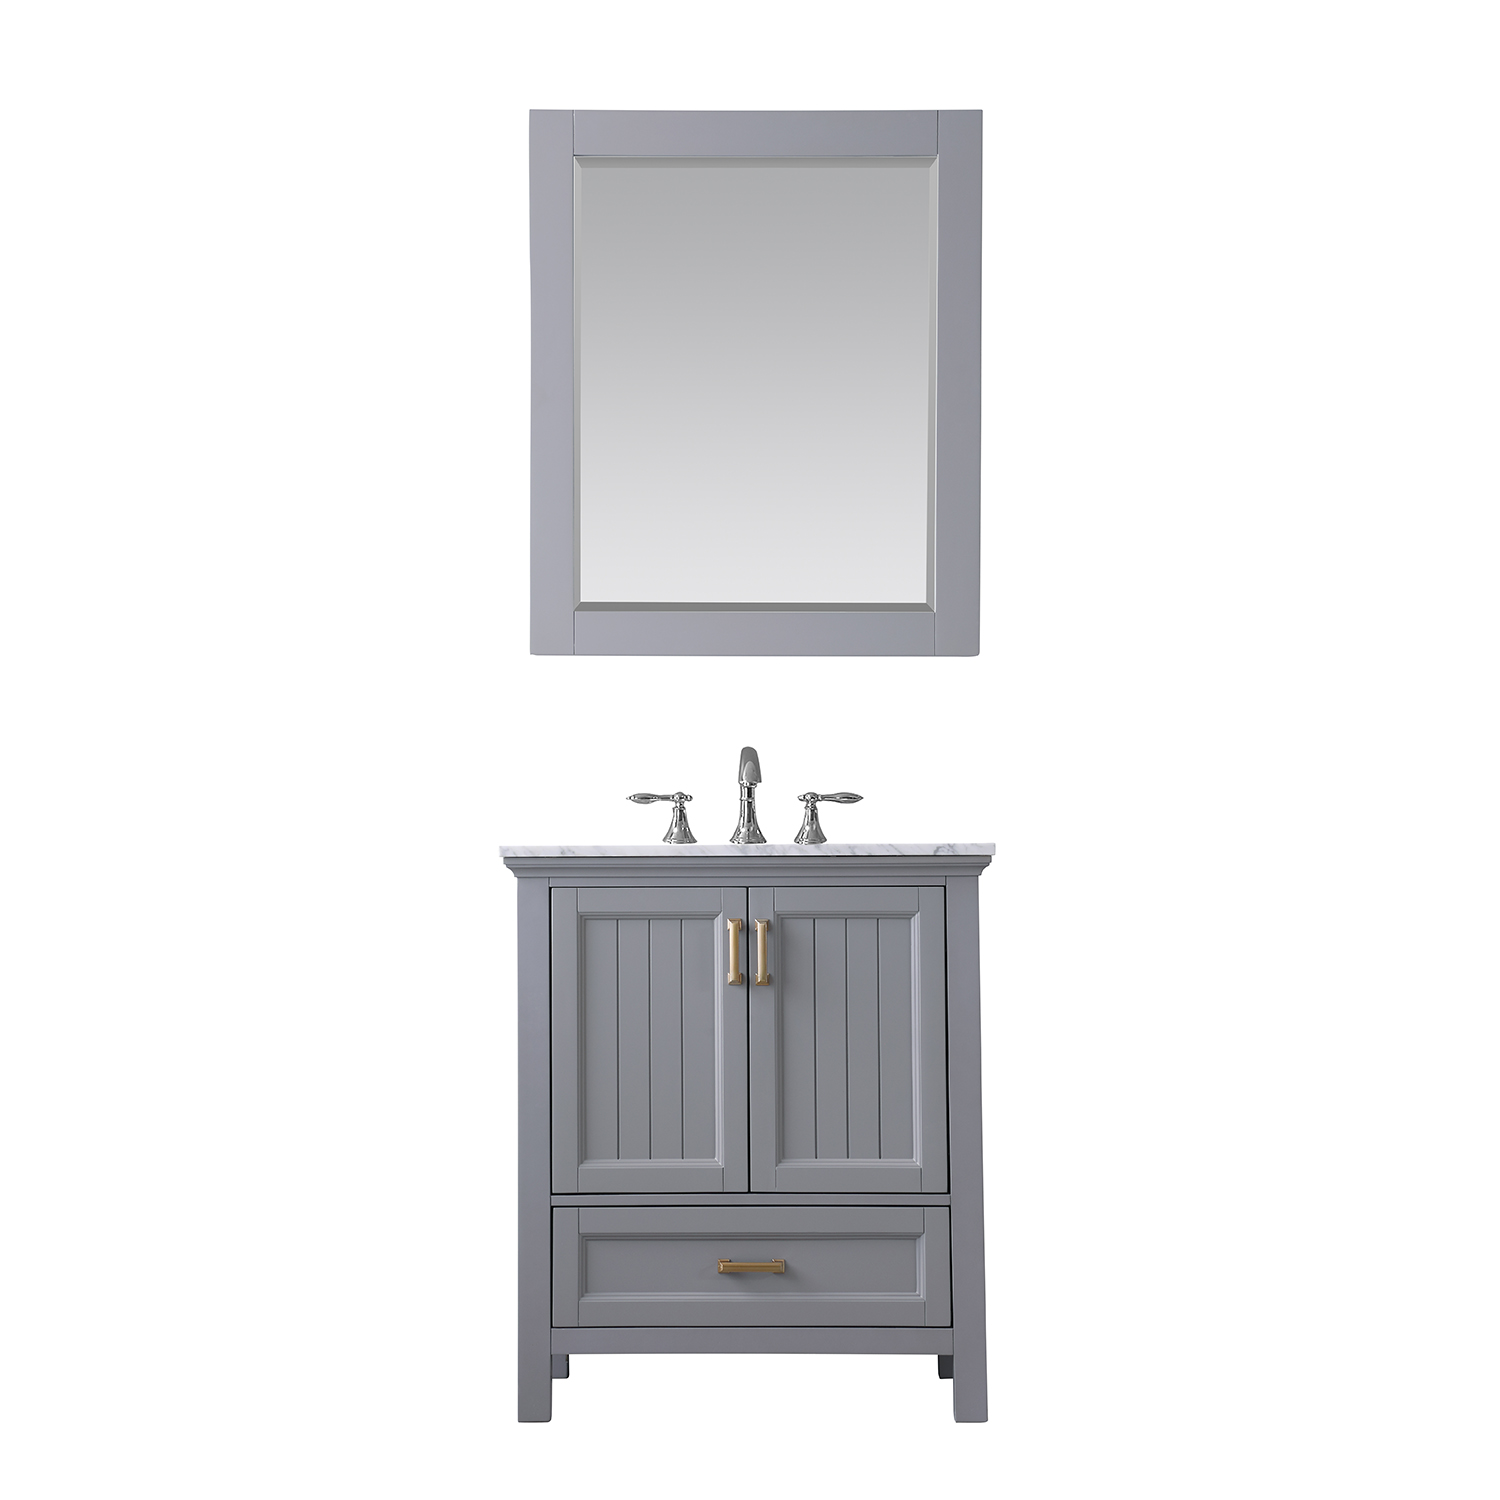 Issac Edwards Collection 30" Single Bathroom Vanity Set in Gray and Carrara White Marble Countertop without Mirror 